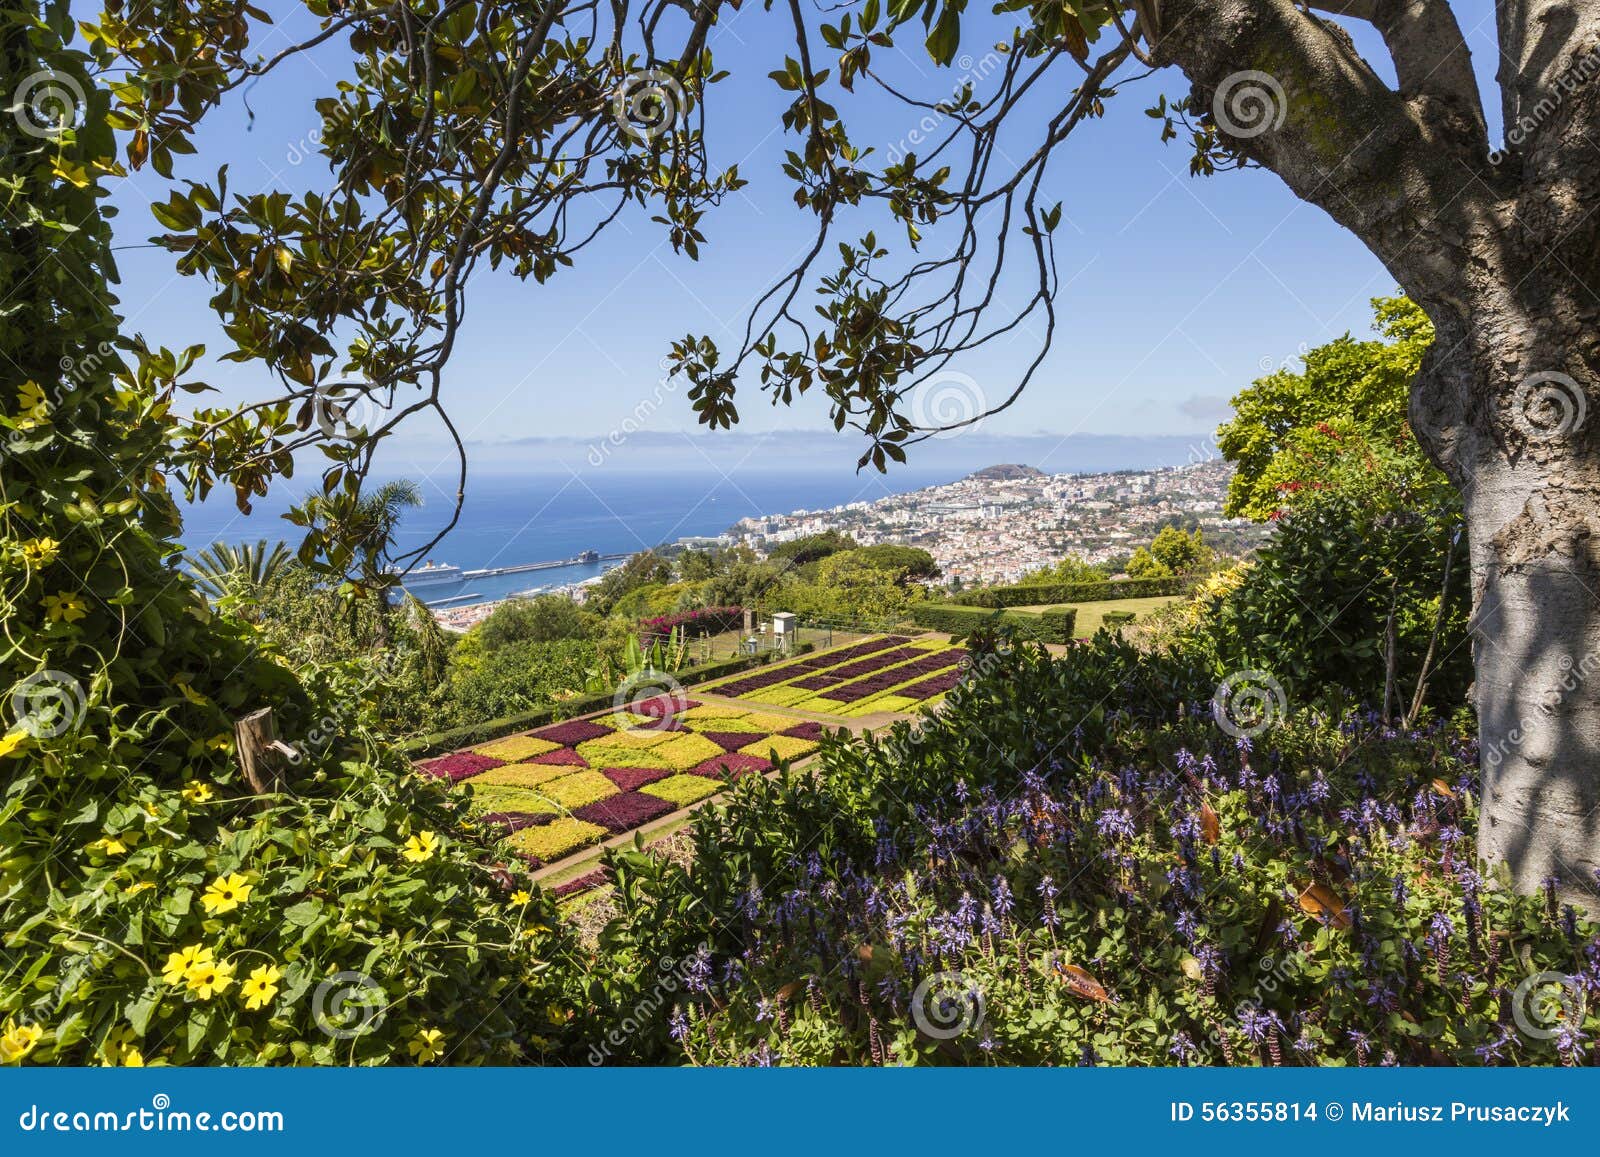 famous tropical botanical gardens in funchal town, madeira island, portugal